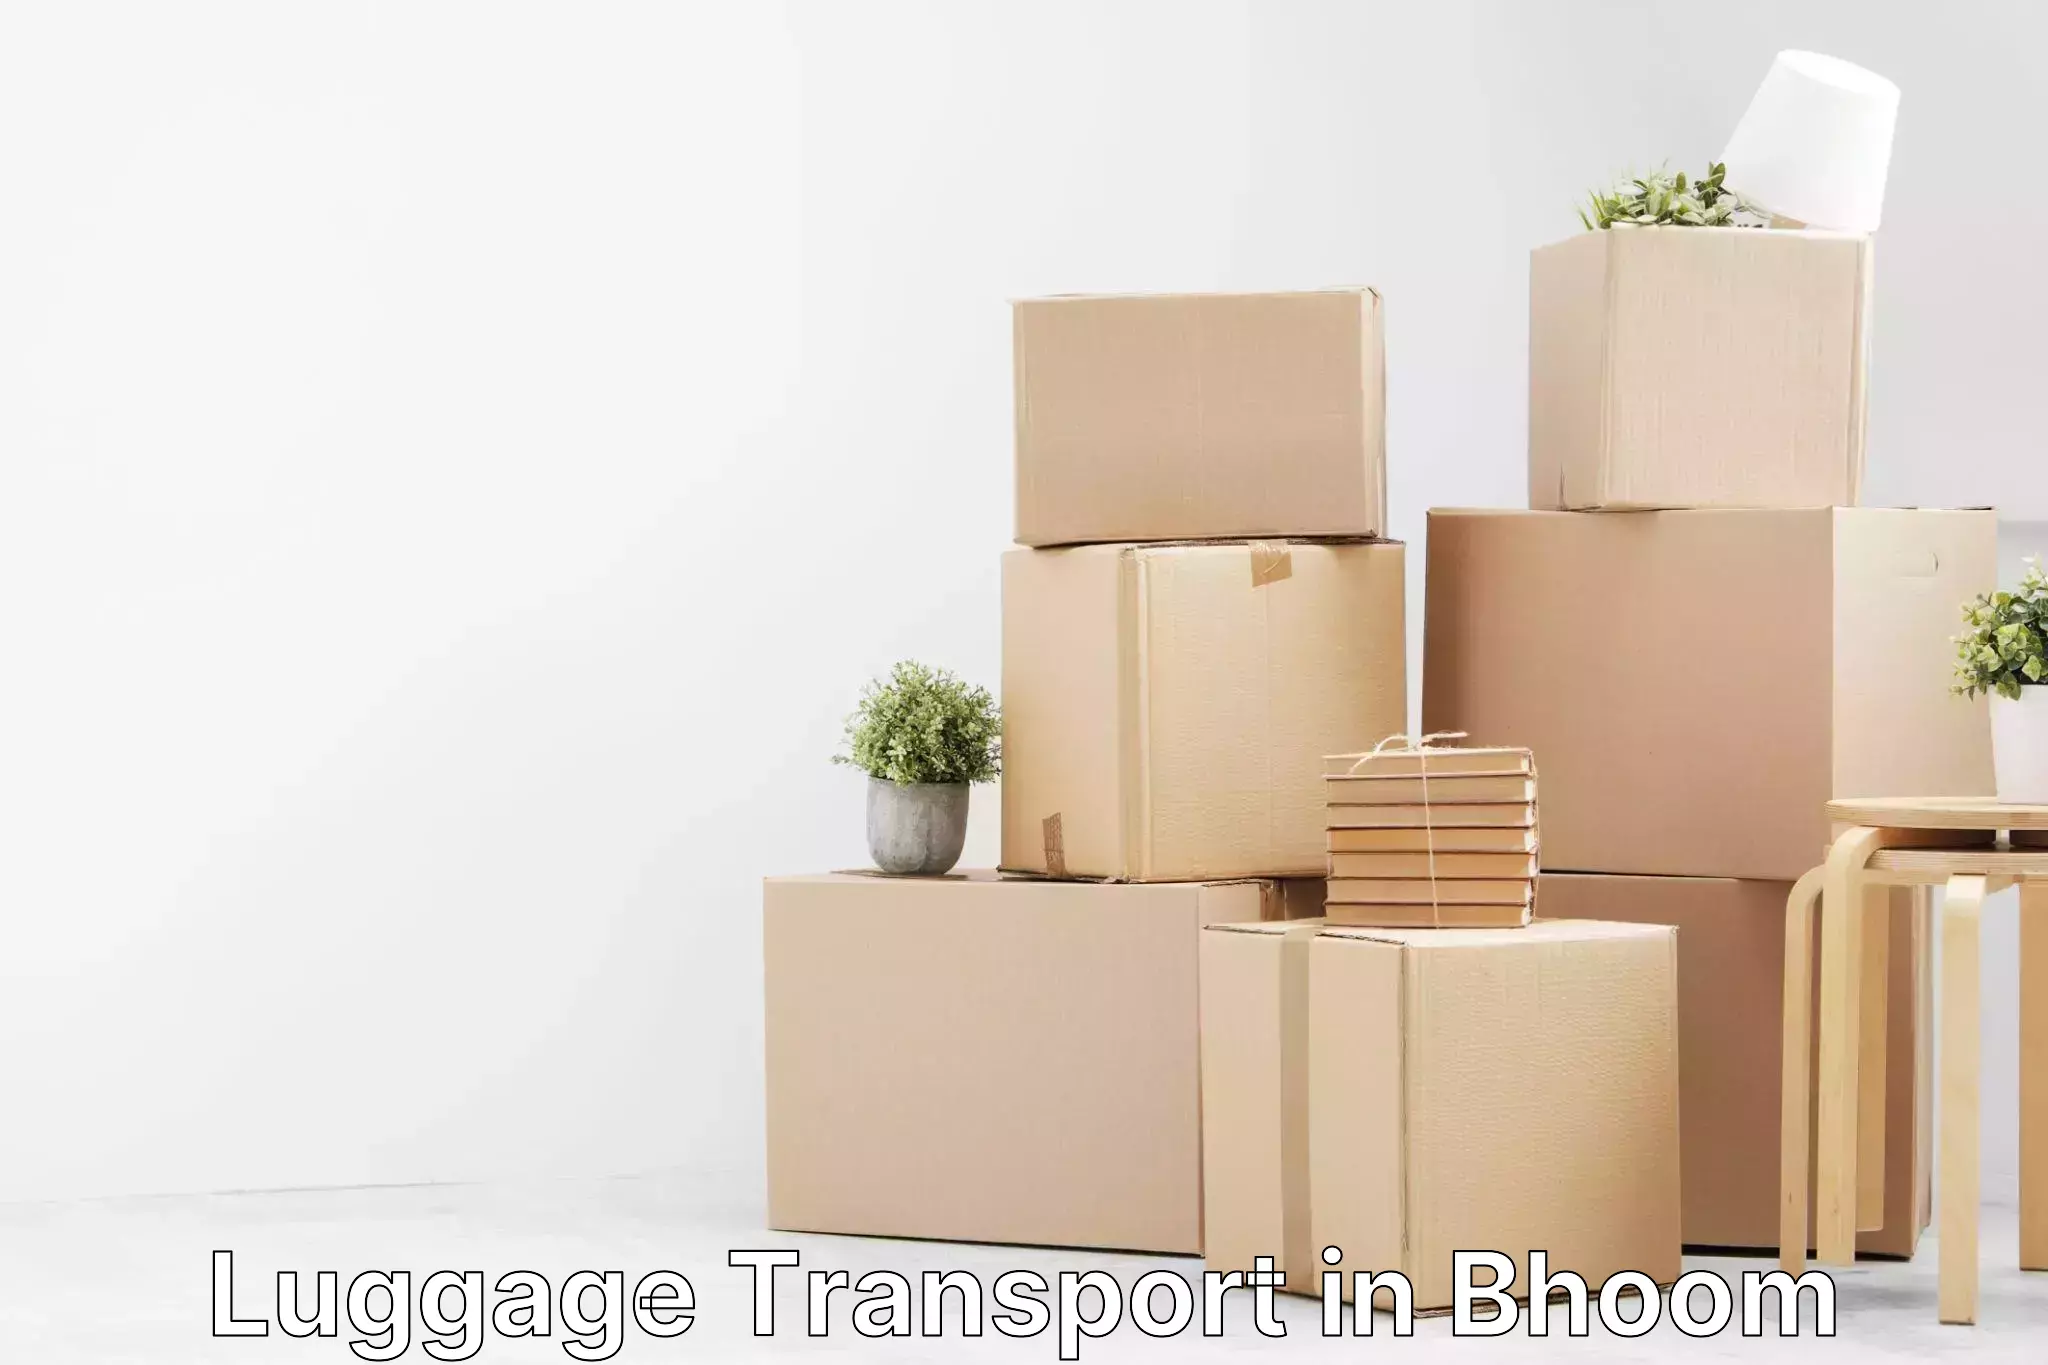 Hassle-free luggage shipping in Bhoom